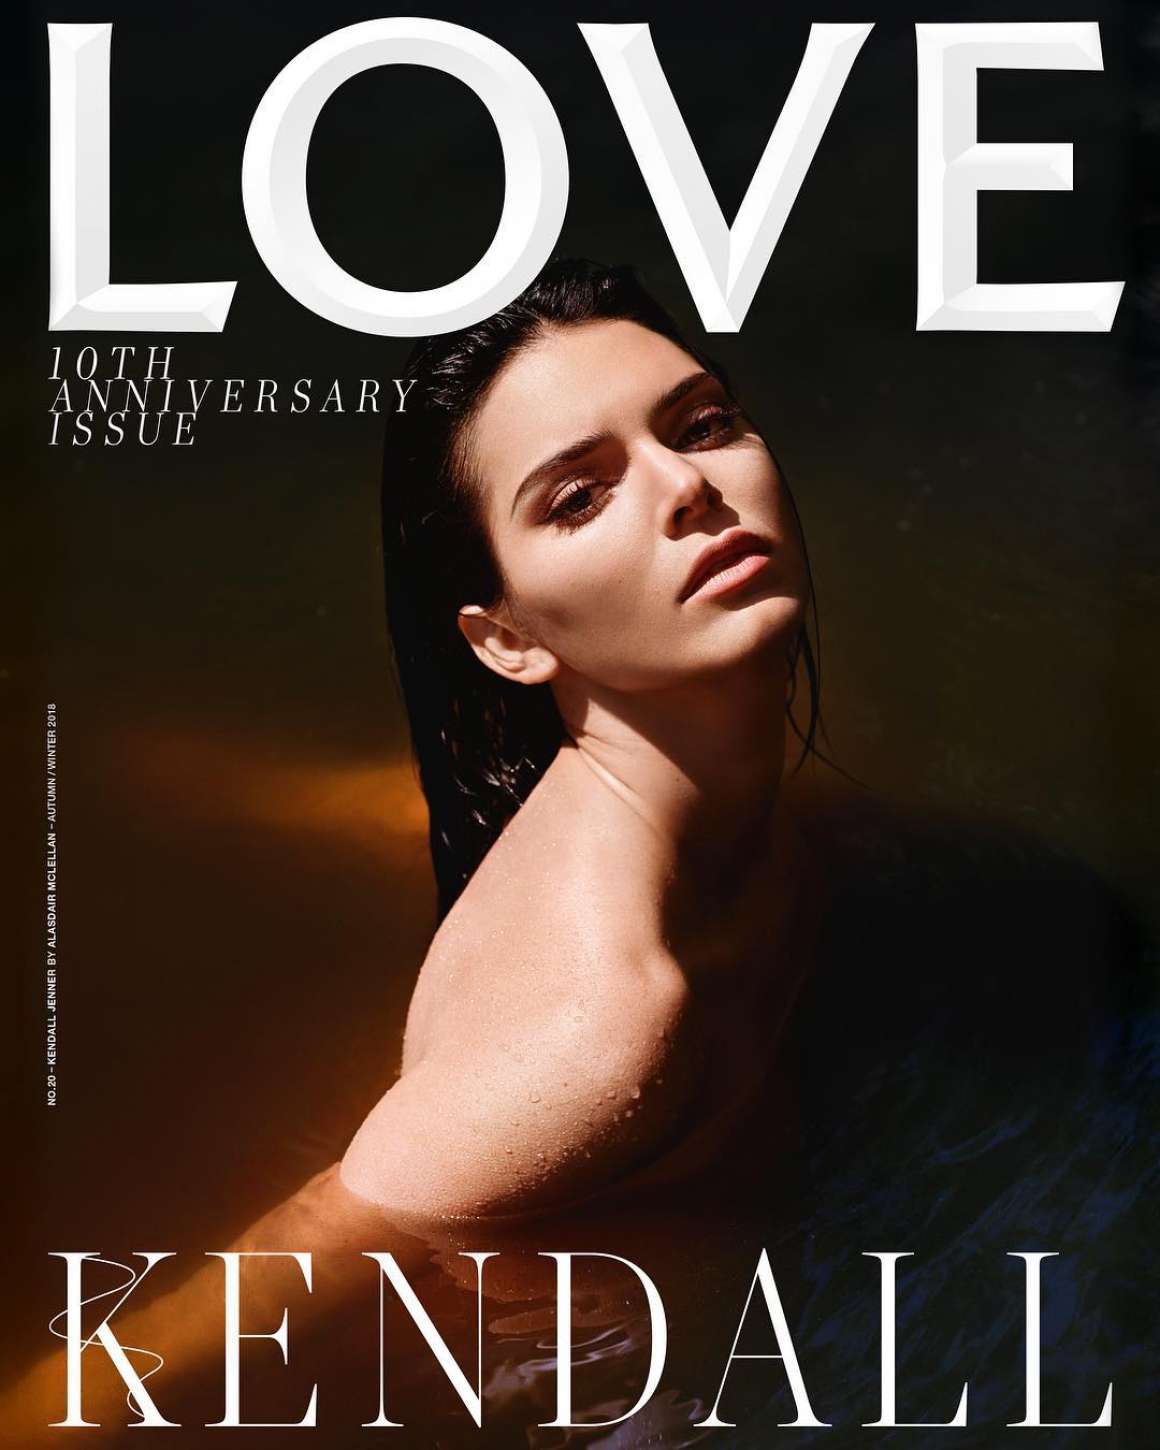 Kendall Jenner for Love Magazine â€“ 10th Anniversary Issue 2018